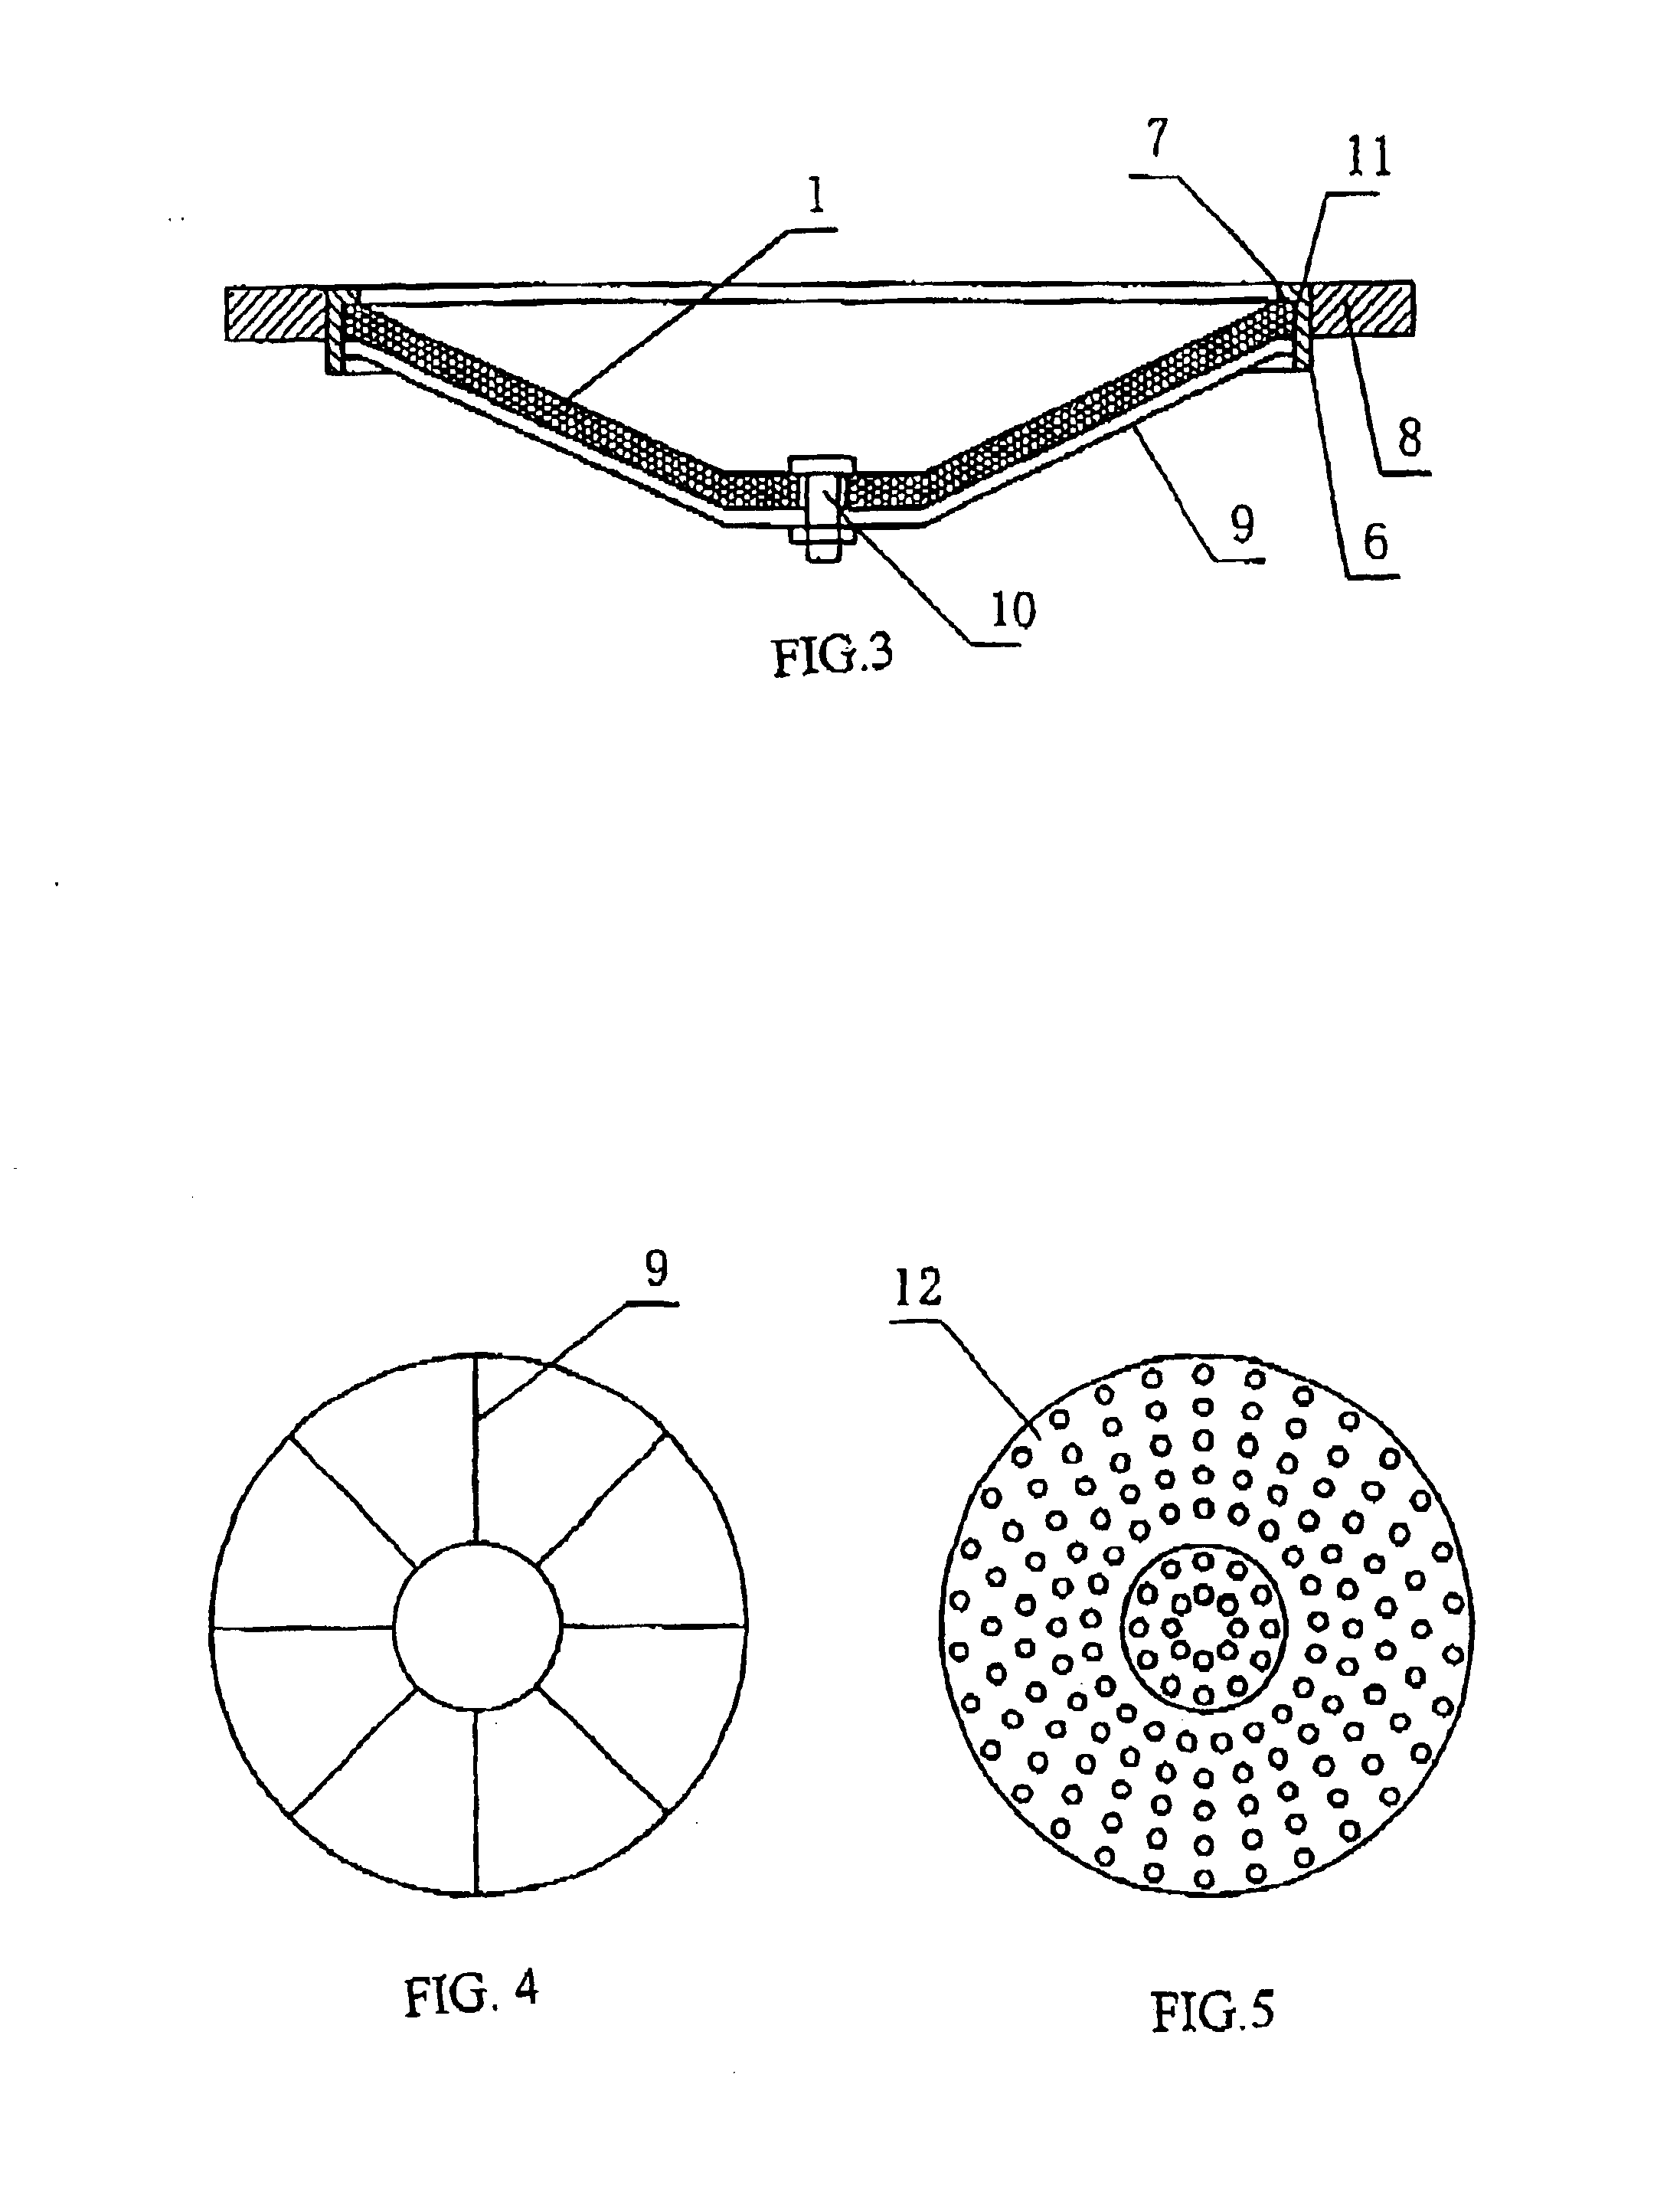 Frustum filter used for separation of cation and anion exchange resins